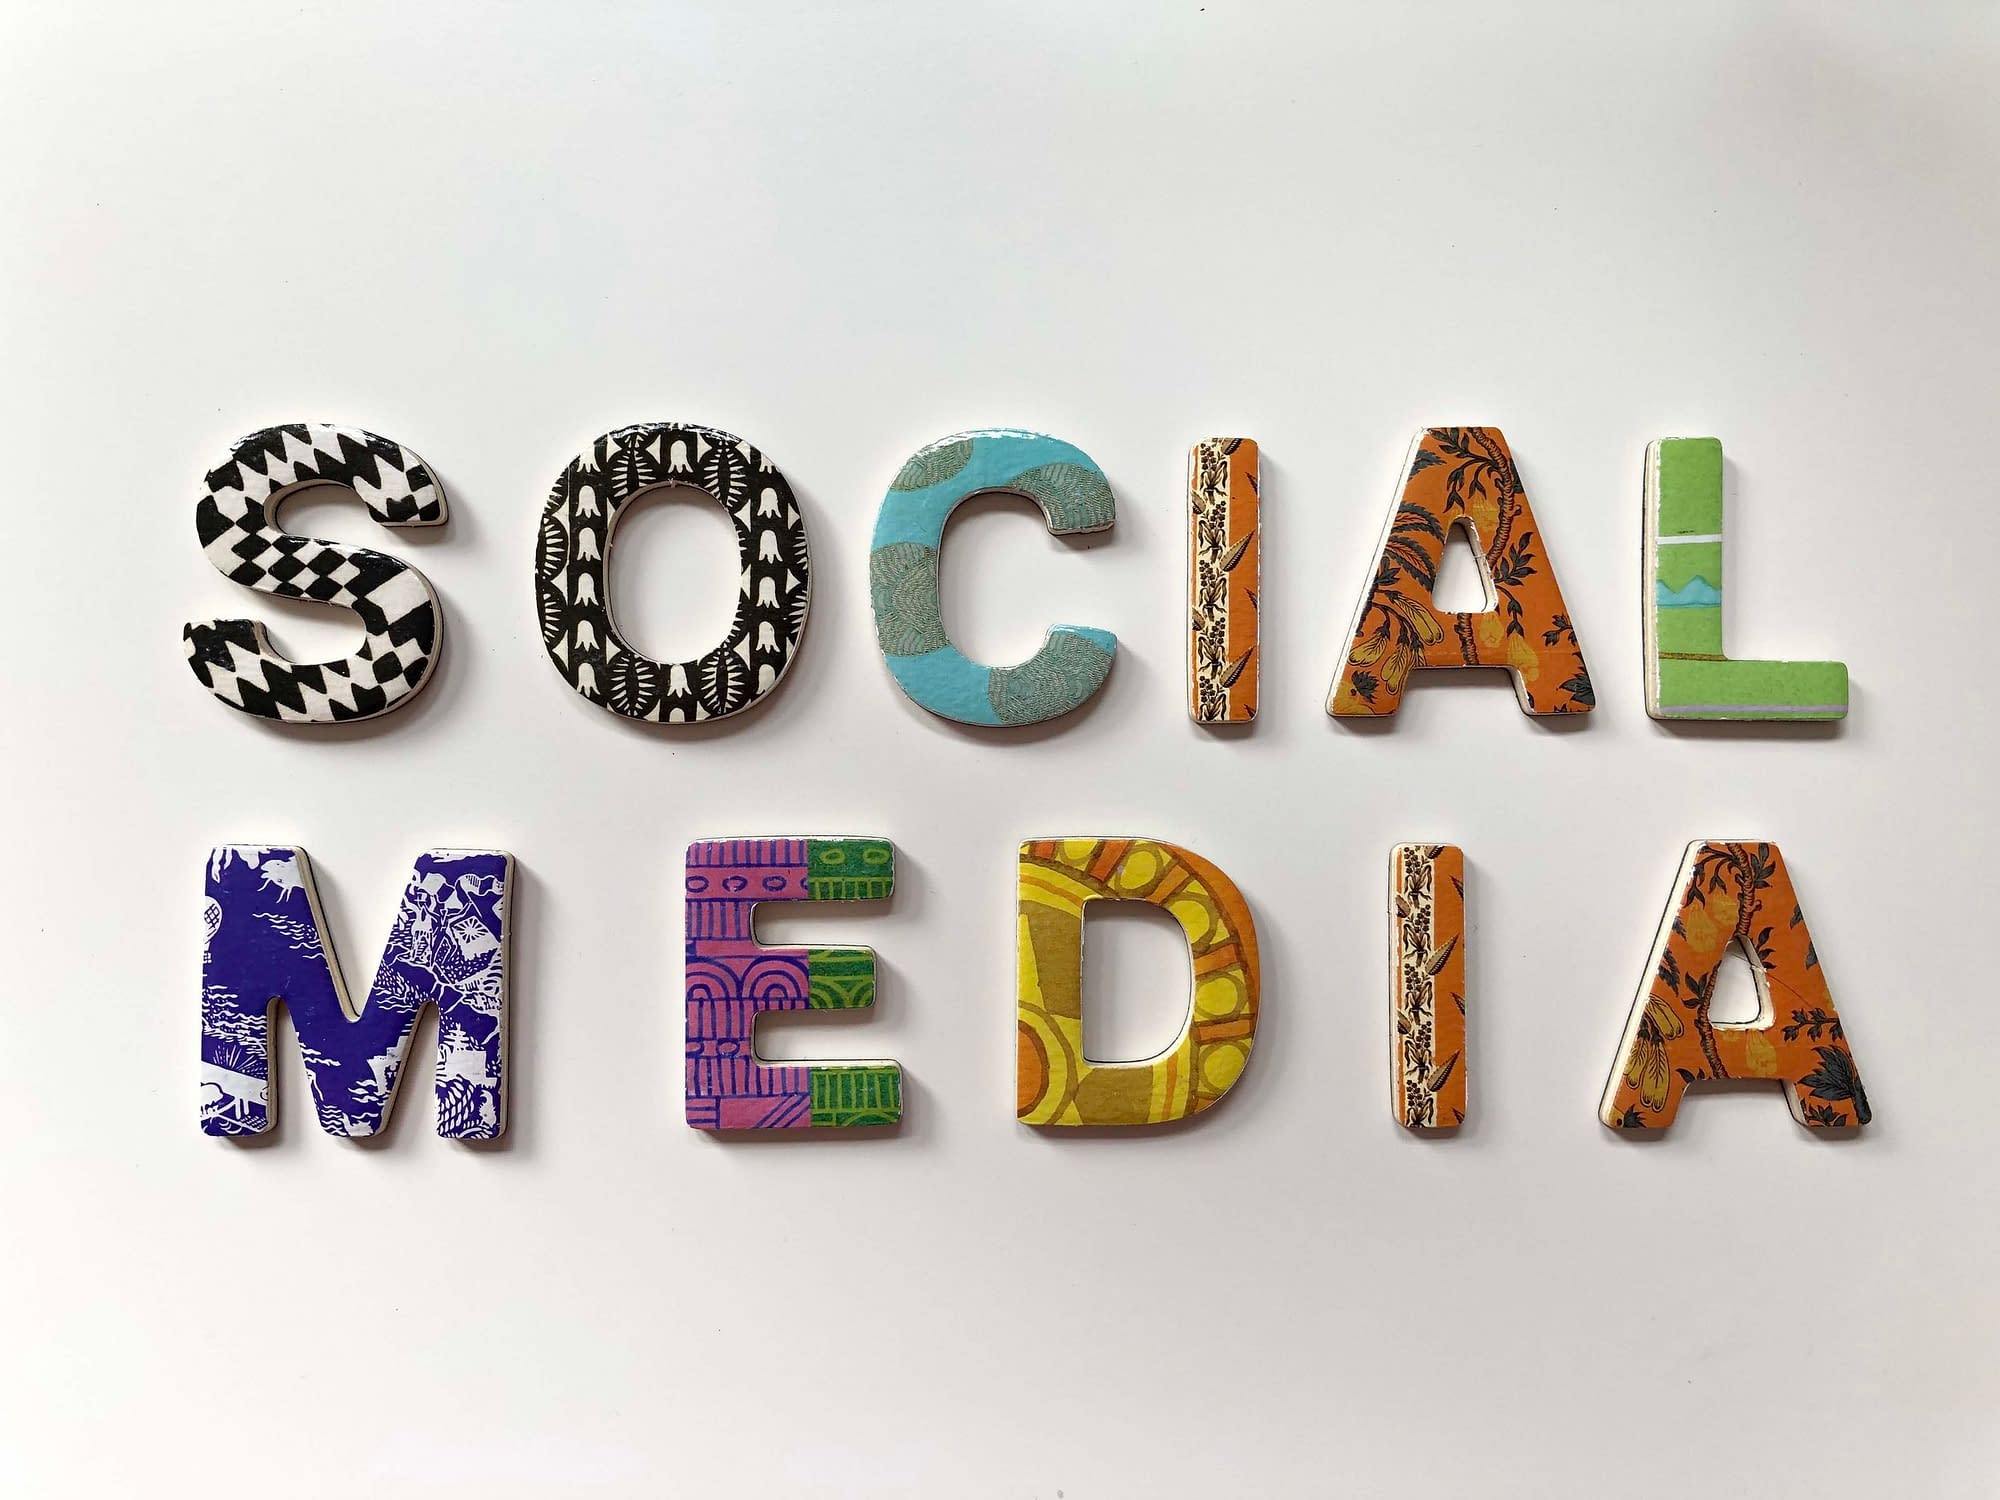 How to Choose a Social Media Management System